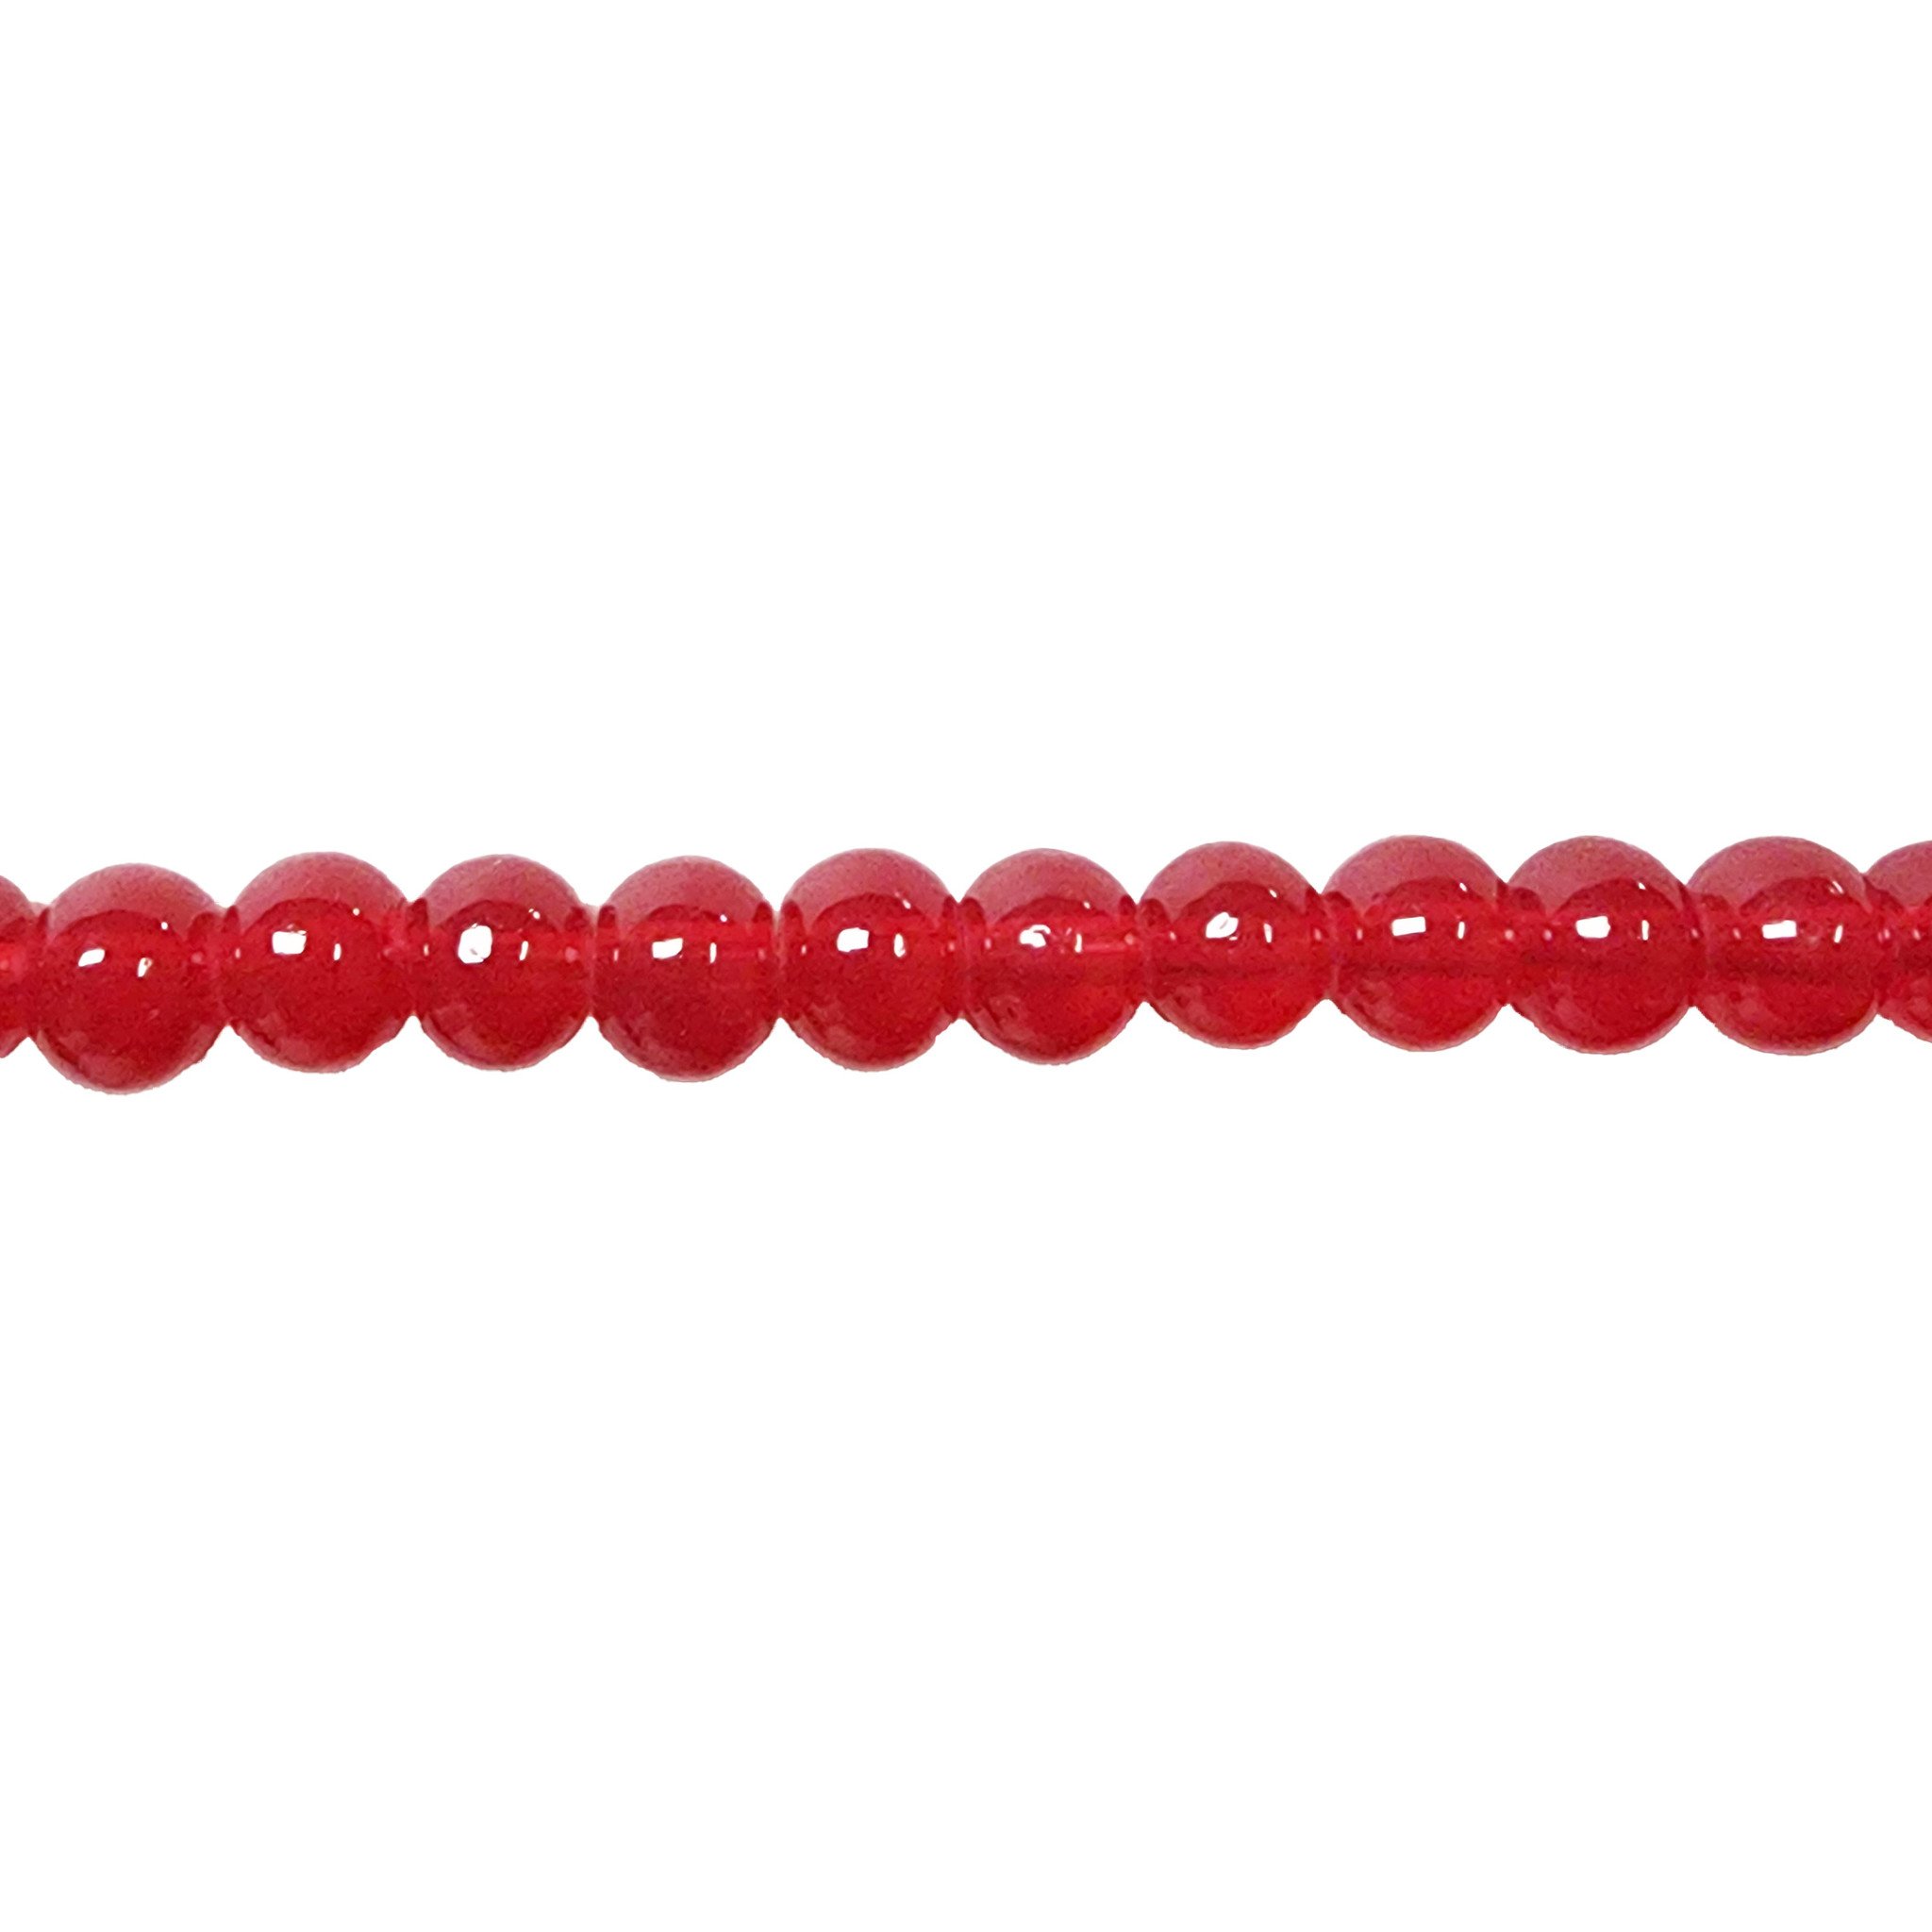 Glass Bead Strand Translucent Red Coral - Bead World Incorporated